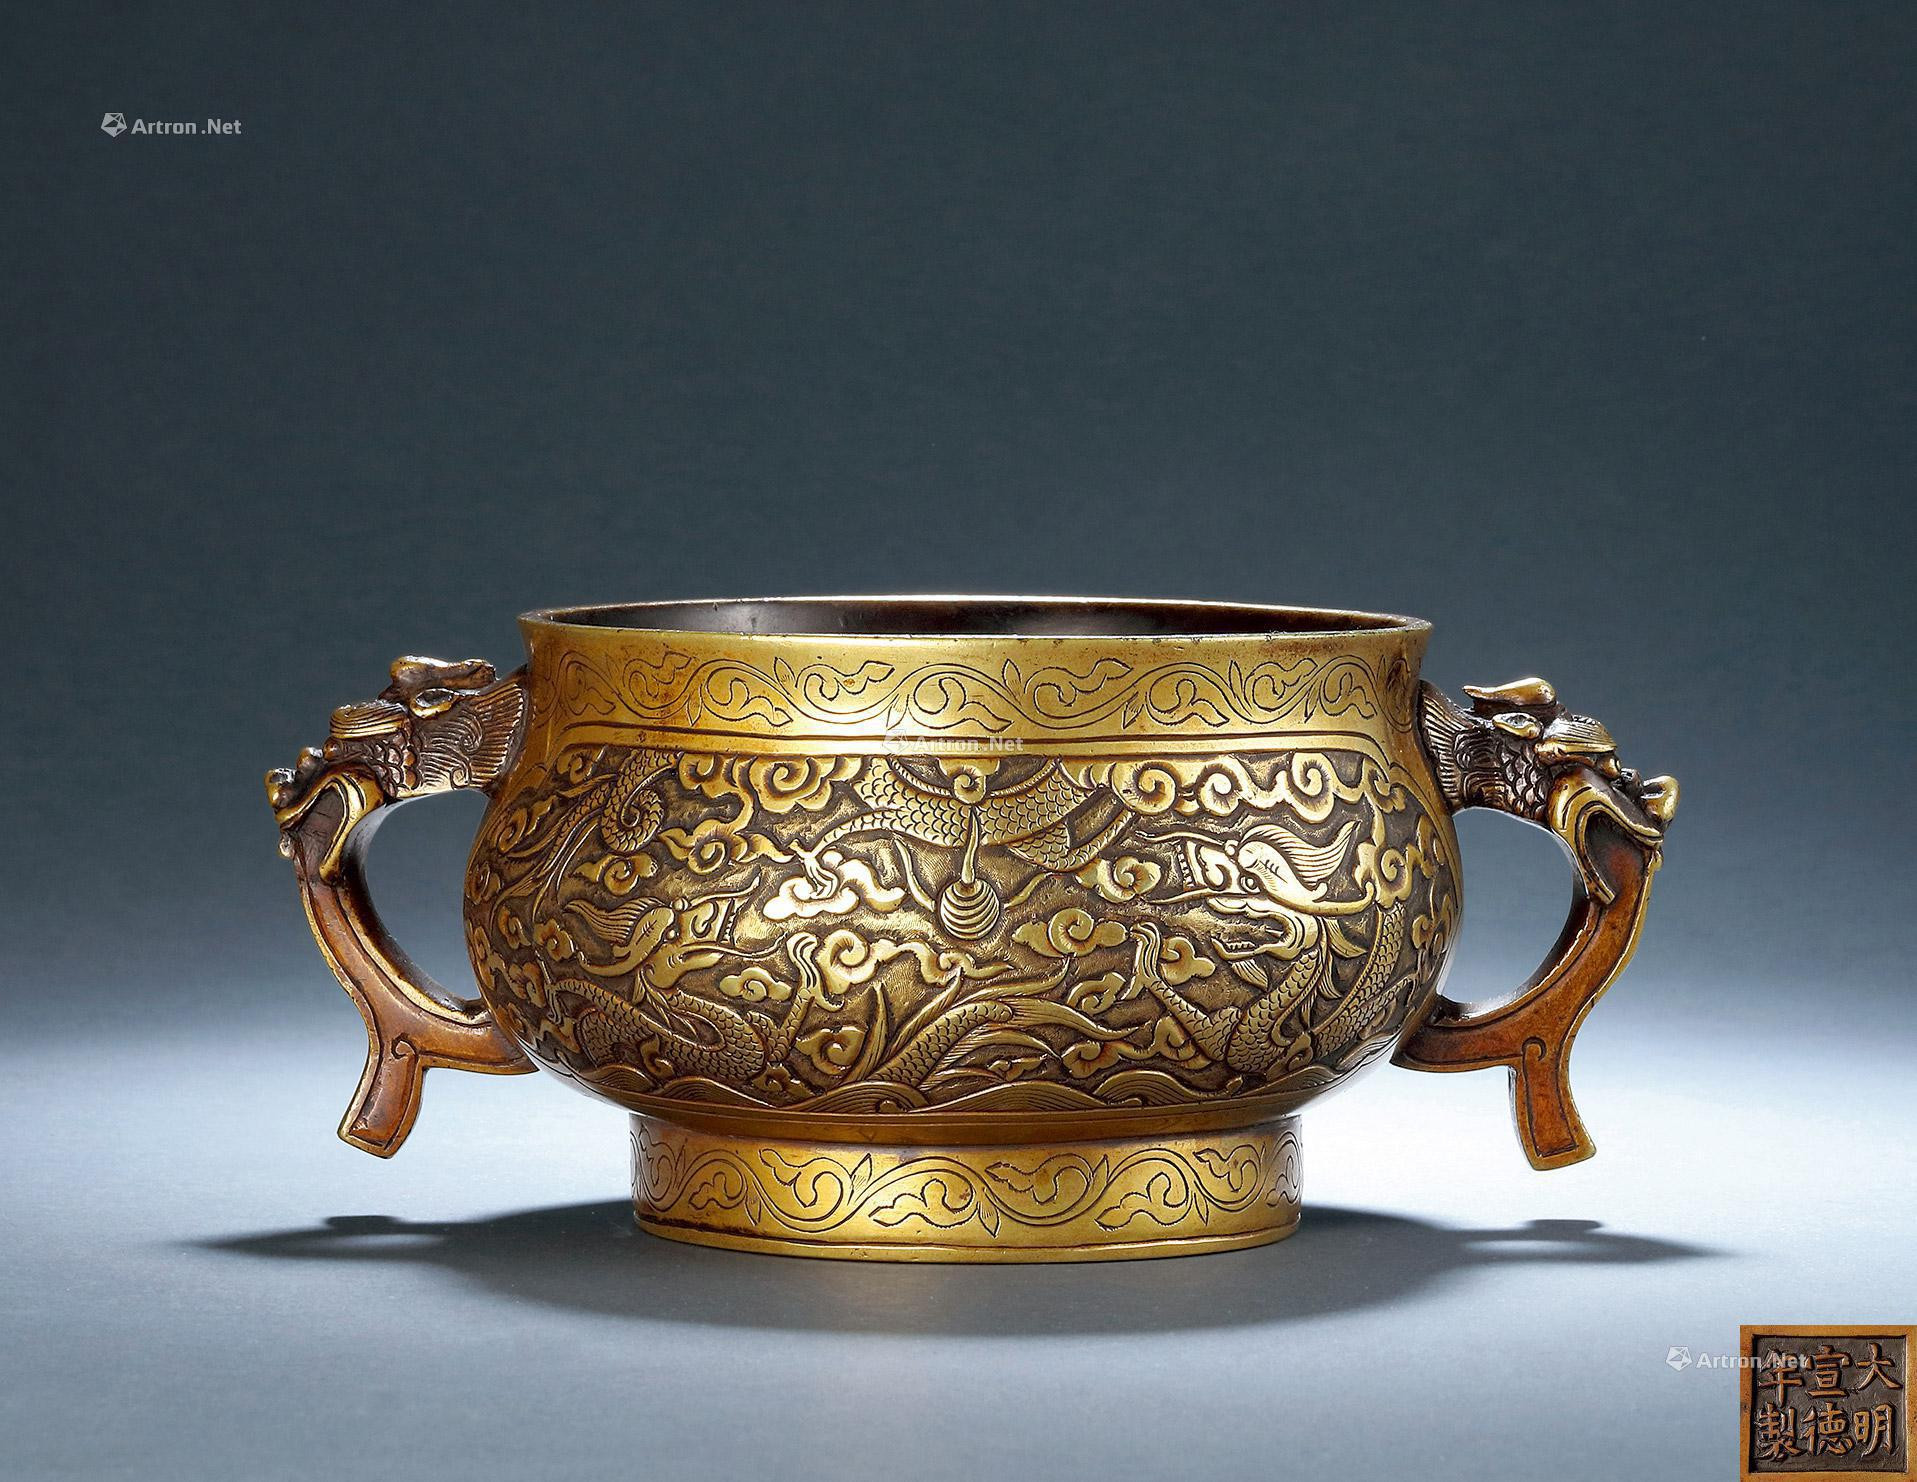 BRONZE INCENSE BURNER WITH DOUBLE HANDLES AND DESIGN OF DOUBLE DRAGONS